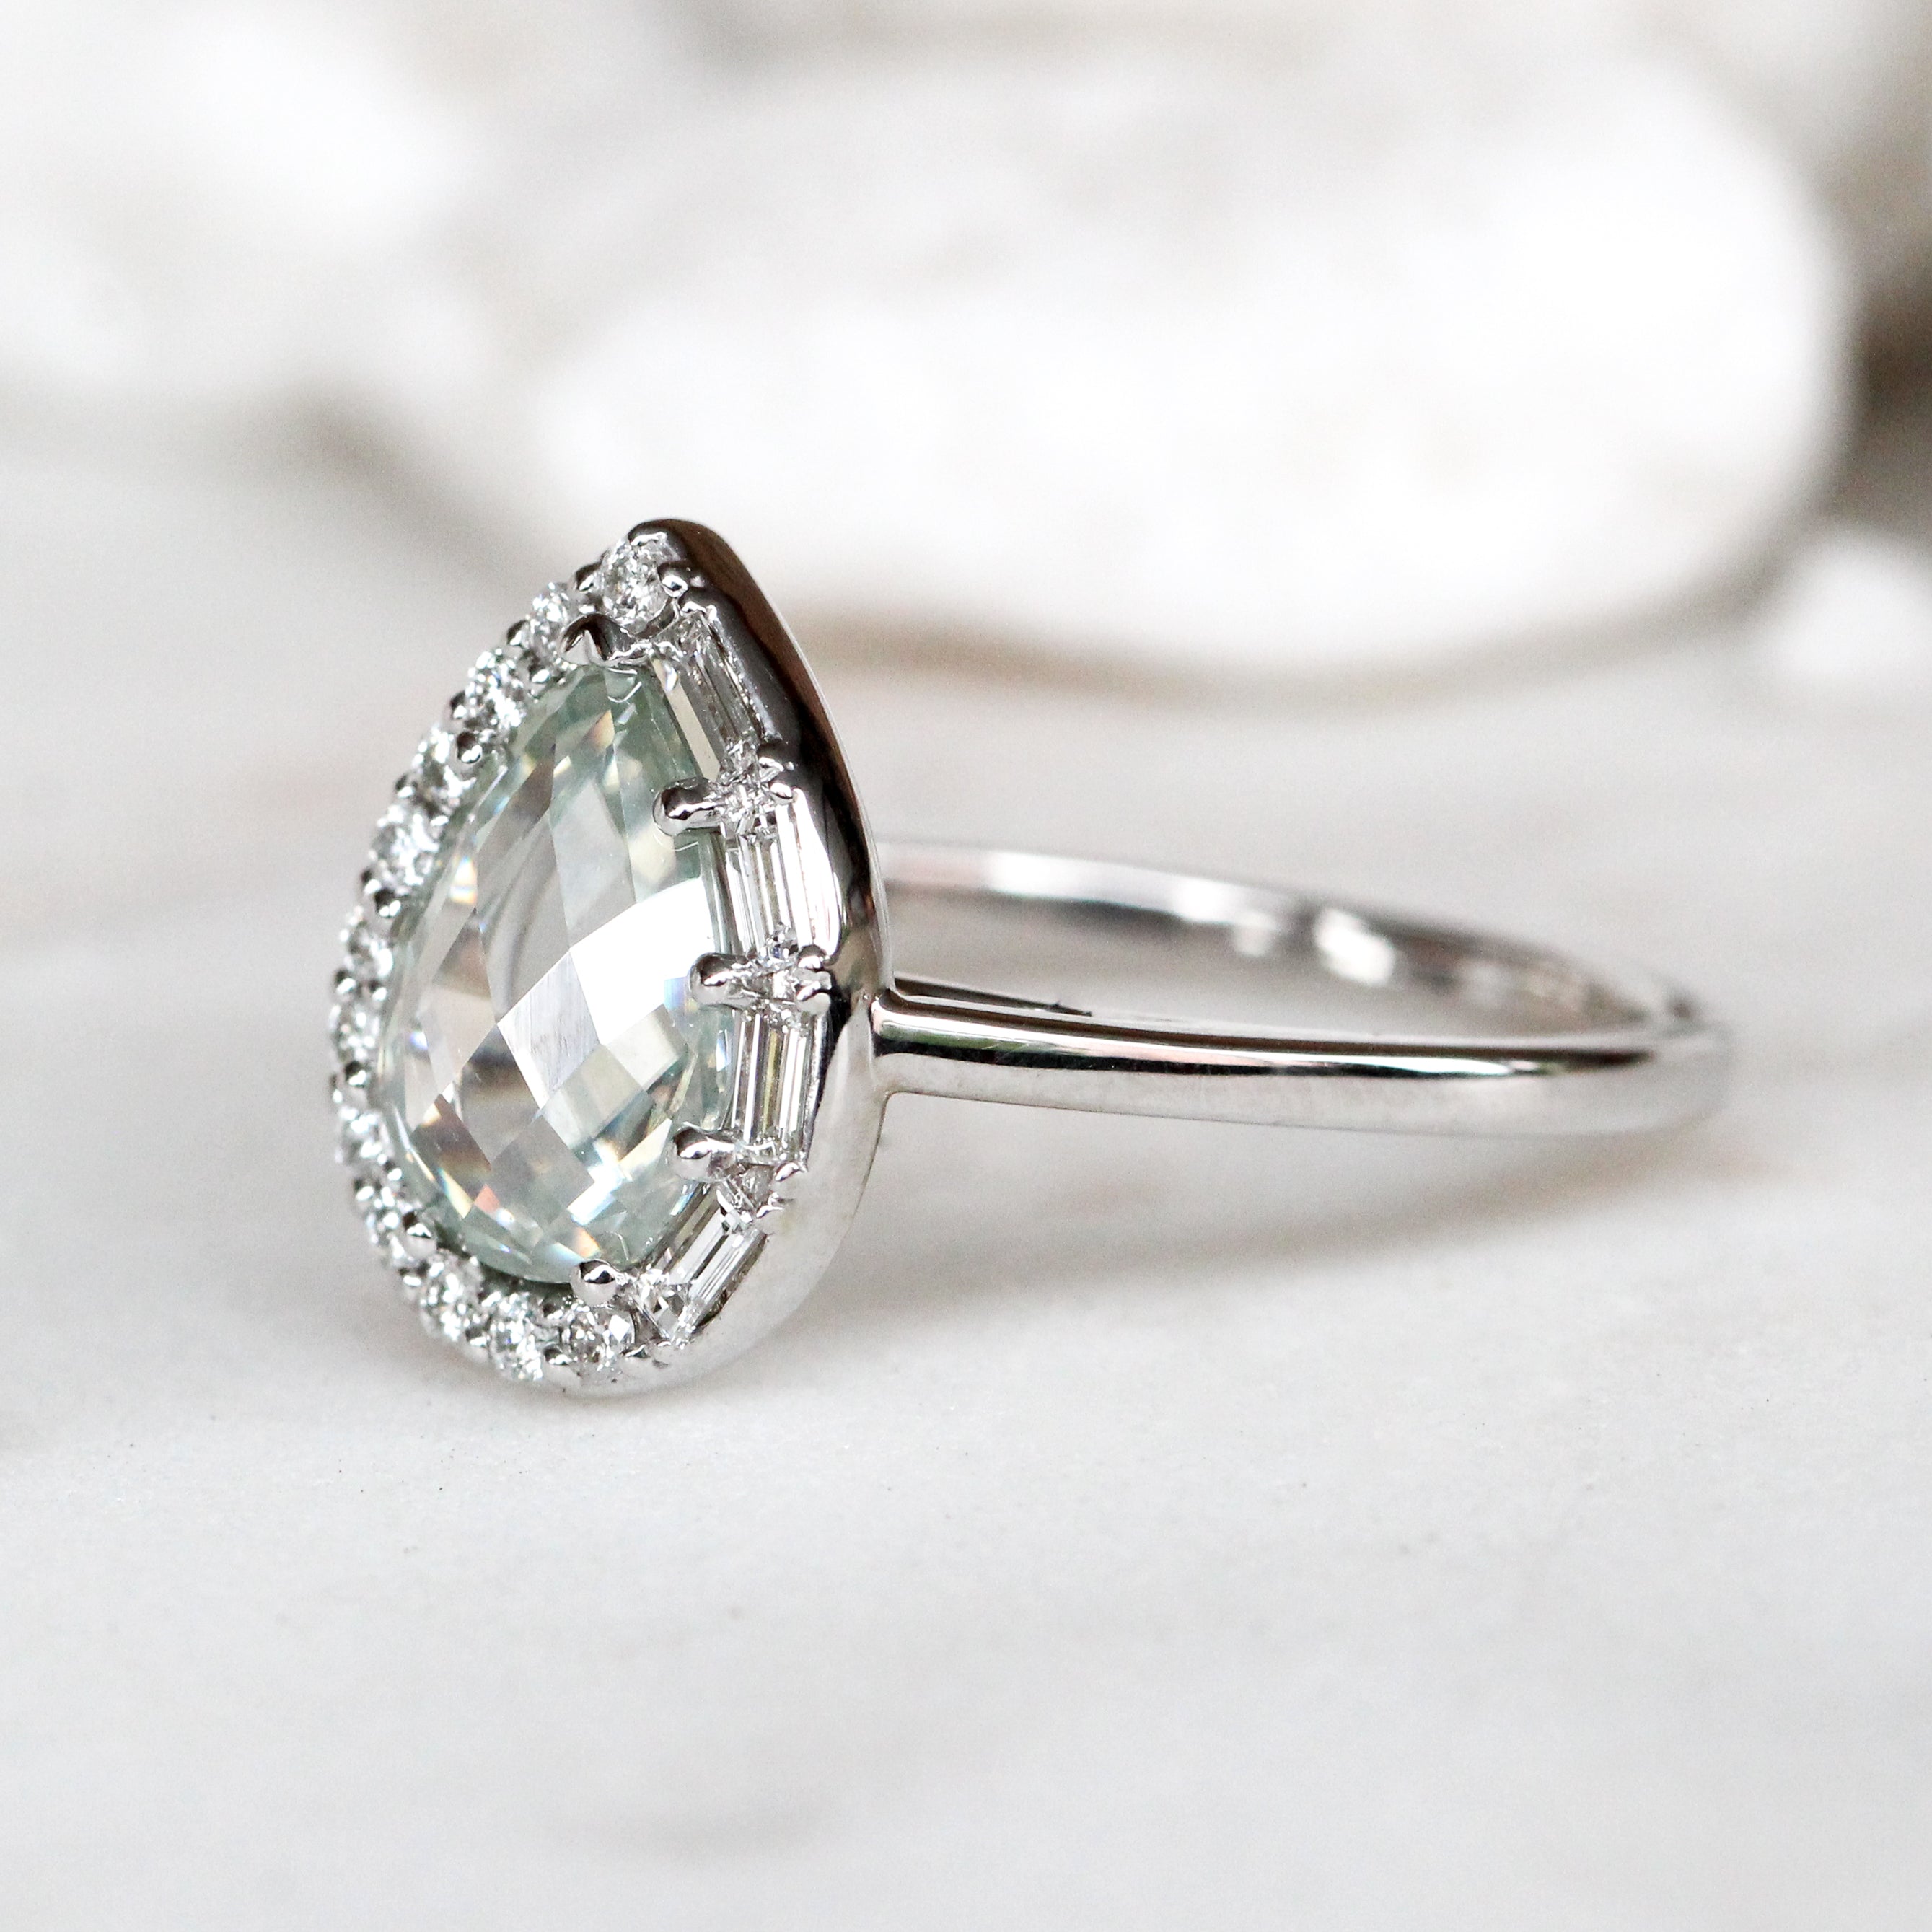 Collins Ring with a 1 Carat Clear Moissanite and White Accent Diamonds in 10k White Gold - Ready to Size and Ship - Midwinter Co. Alternative Bridal Rings and Modern Fine Jewelry